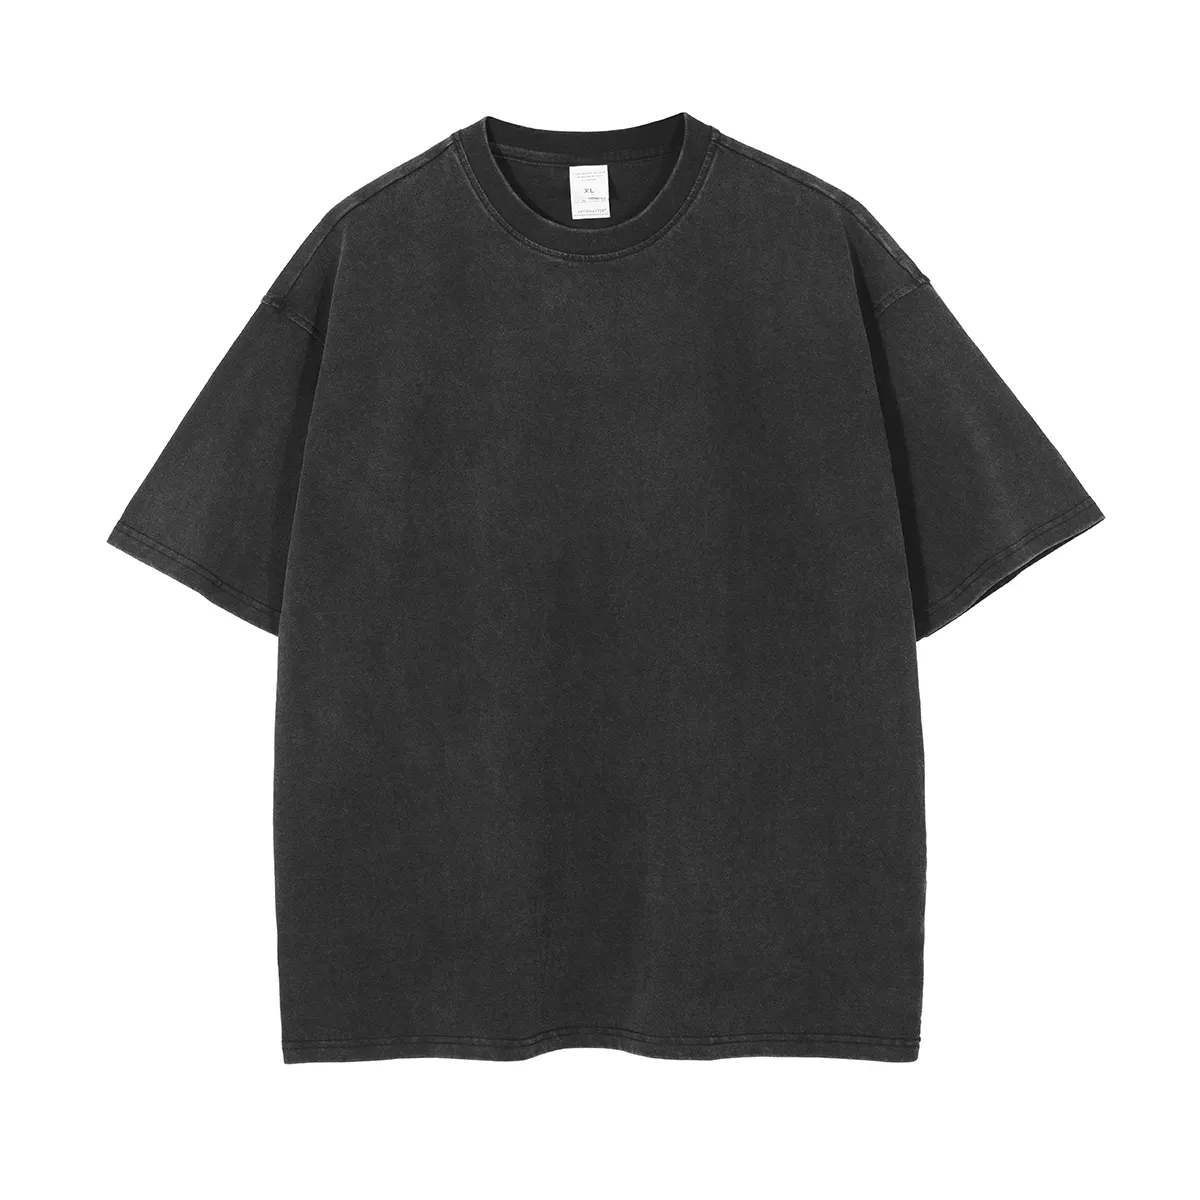 CL High Quality Washed Vintage Blank Tshirt Plain Cotton Vintage Oversized T Shirts Personalized Custom Loose Men 100% Cotton